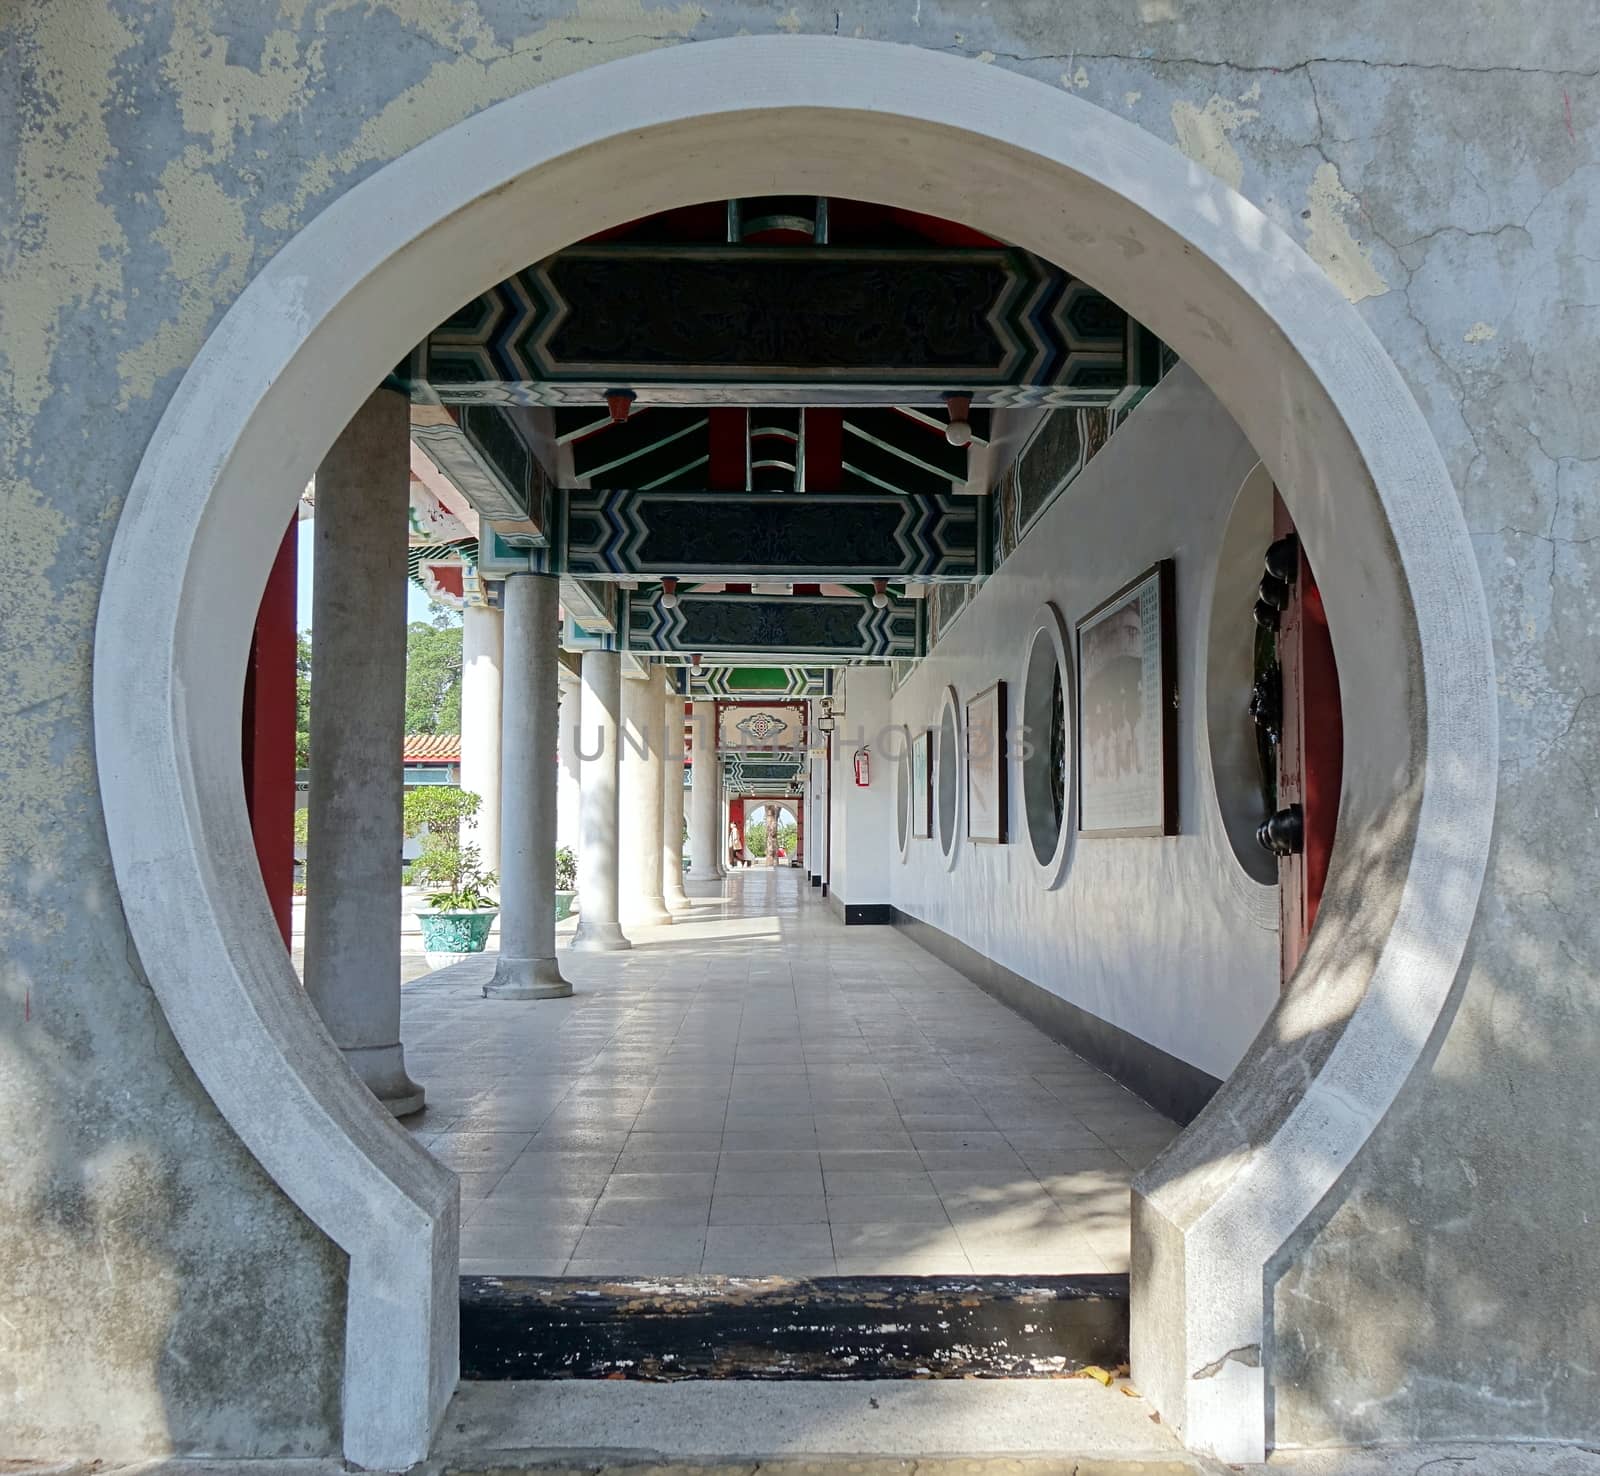 KAOHSIUNG, TAIWAN -- APRIL 29, 2017: A moon gate and corridor at the Kaohsiung Martyrs' Shrine, which is dedicated to the soldiers who died during World War Two. 